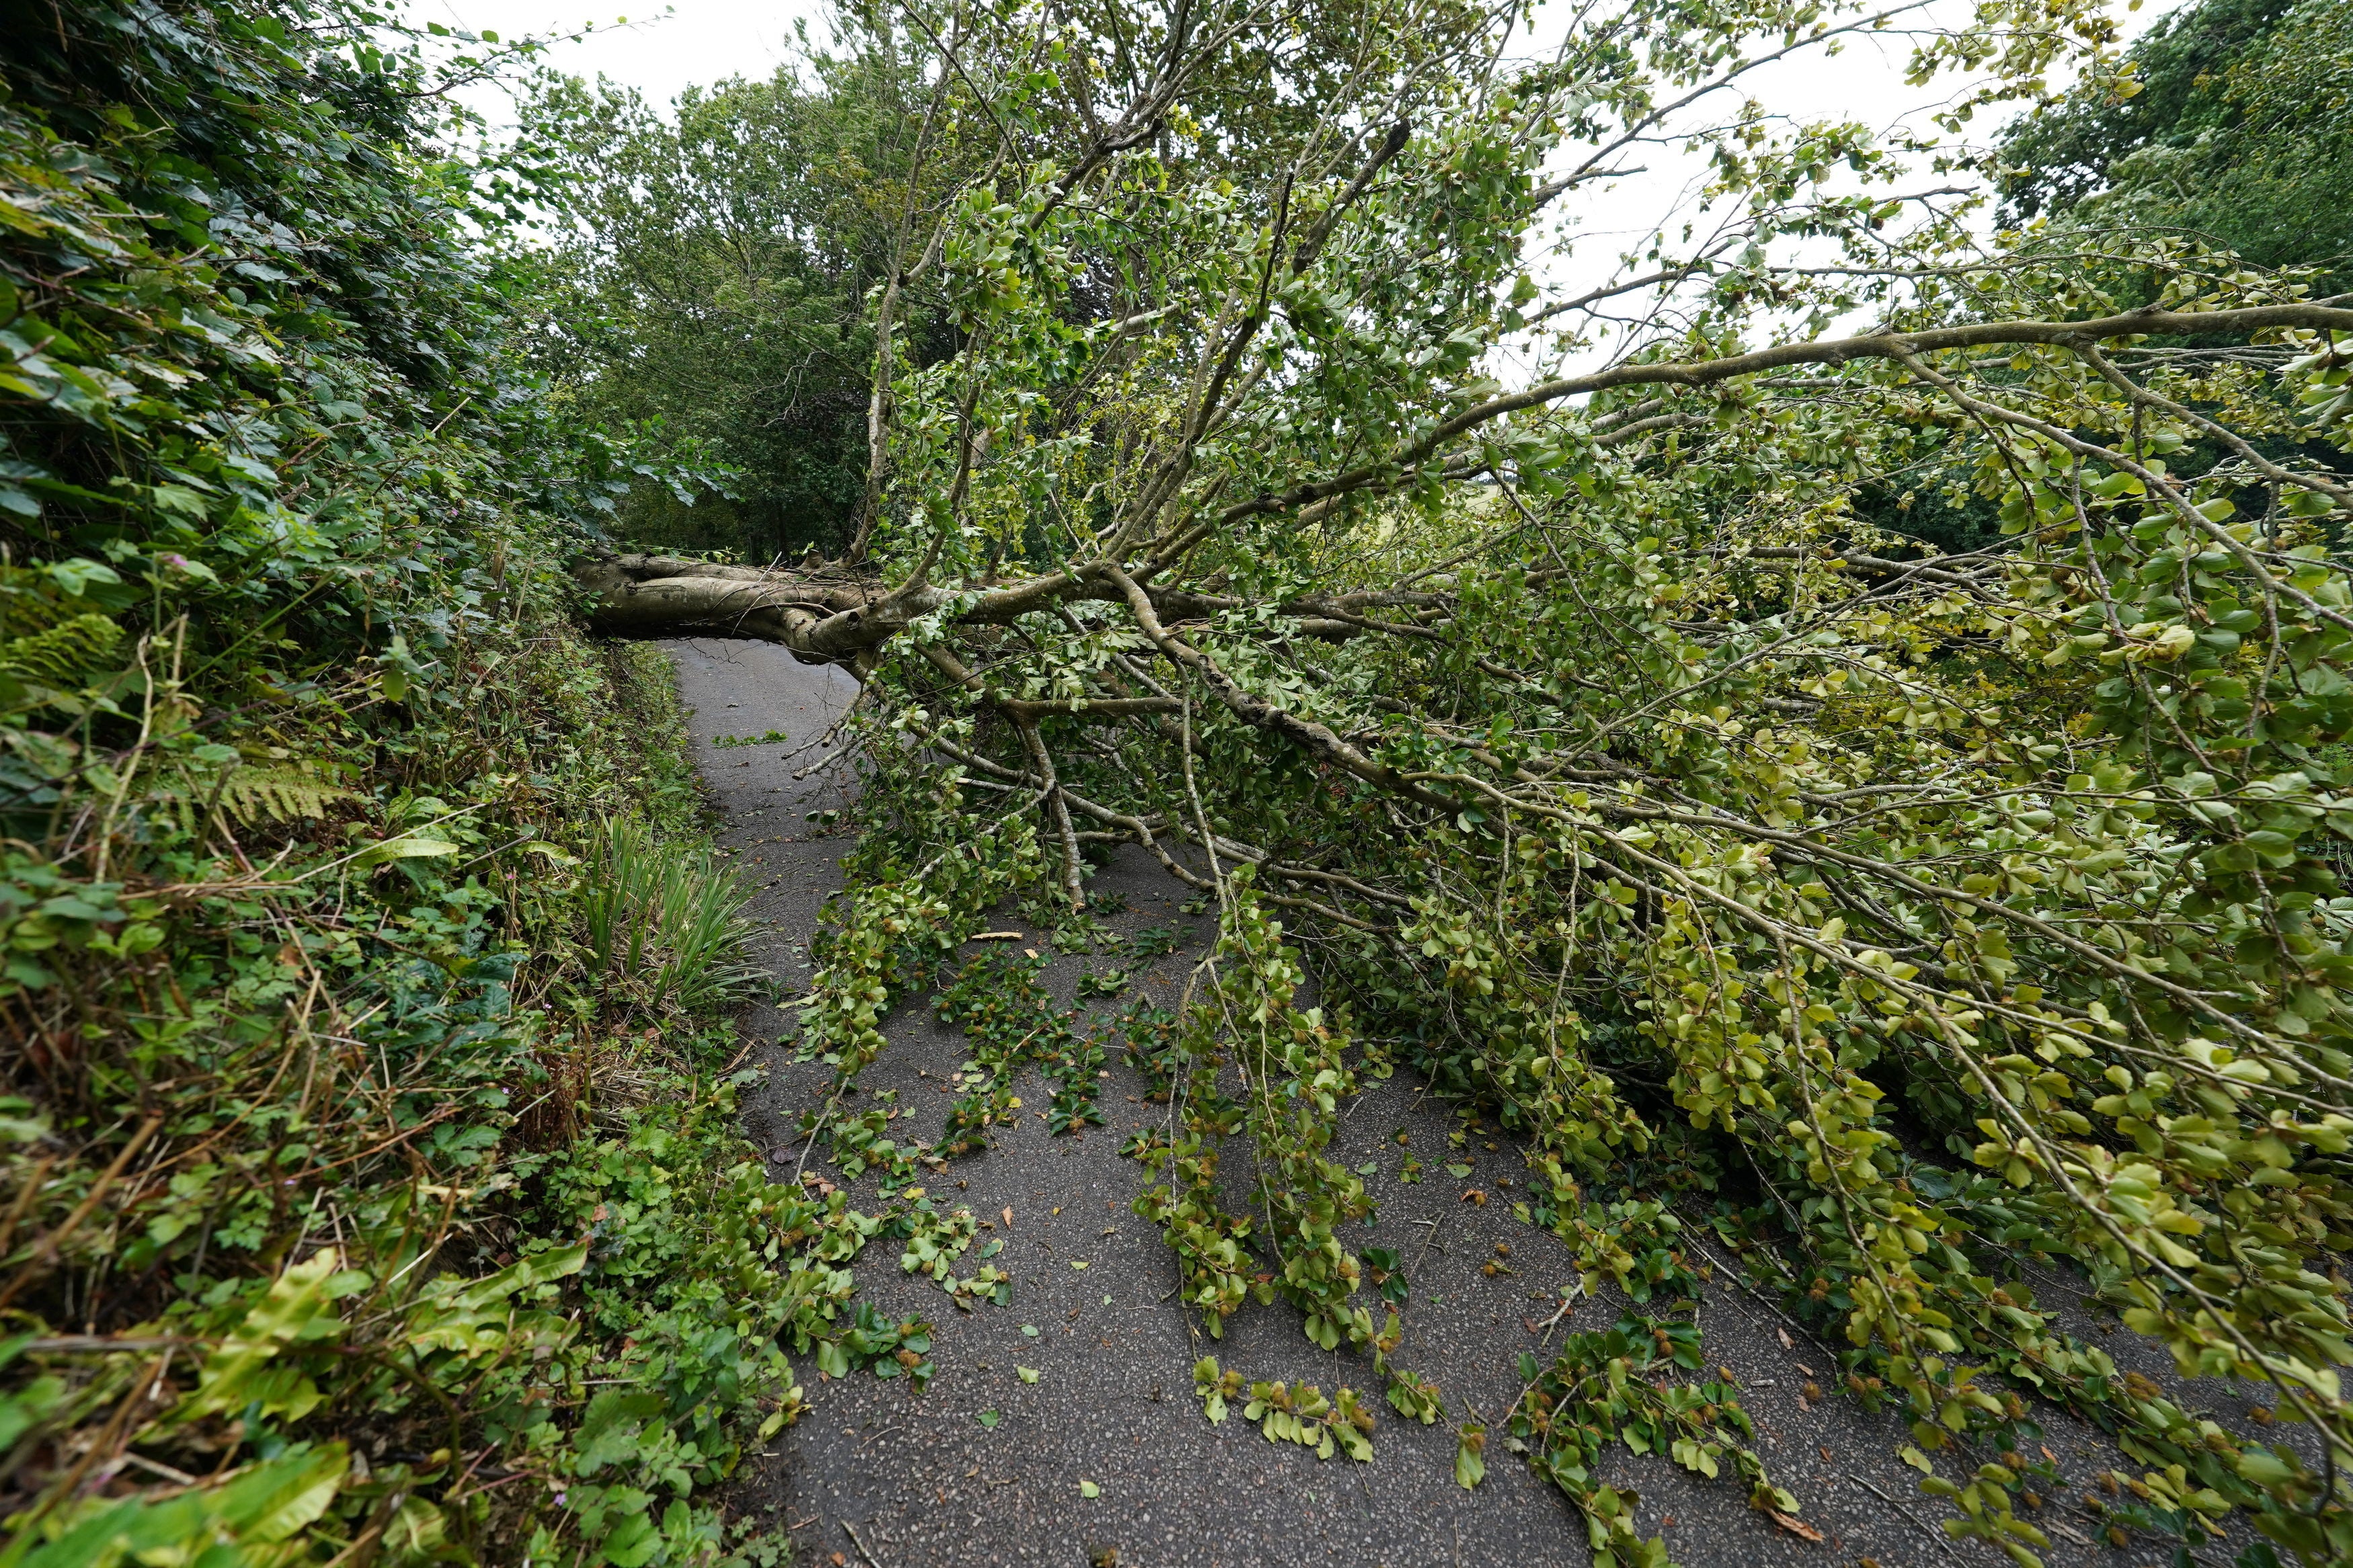 A fallen tree on the road to Veryan on the Roseland Peninsula in Cornwall